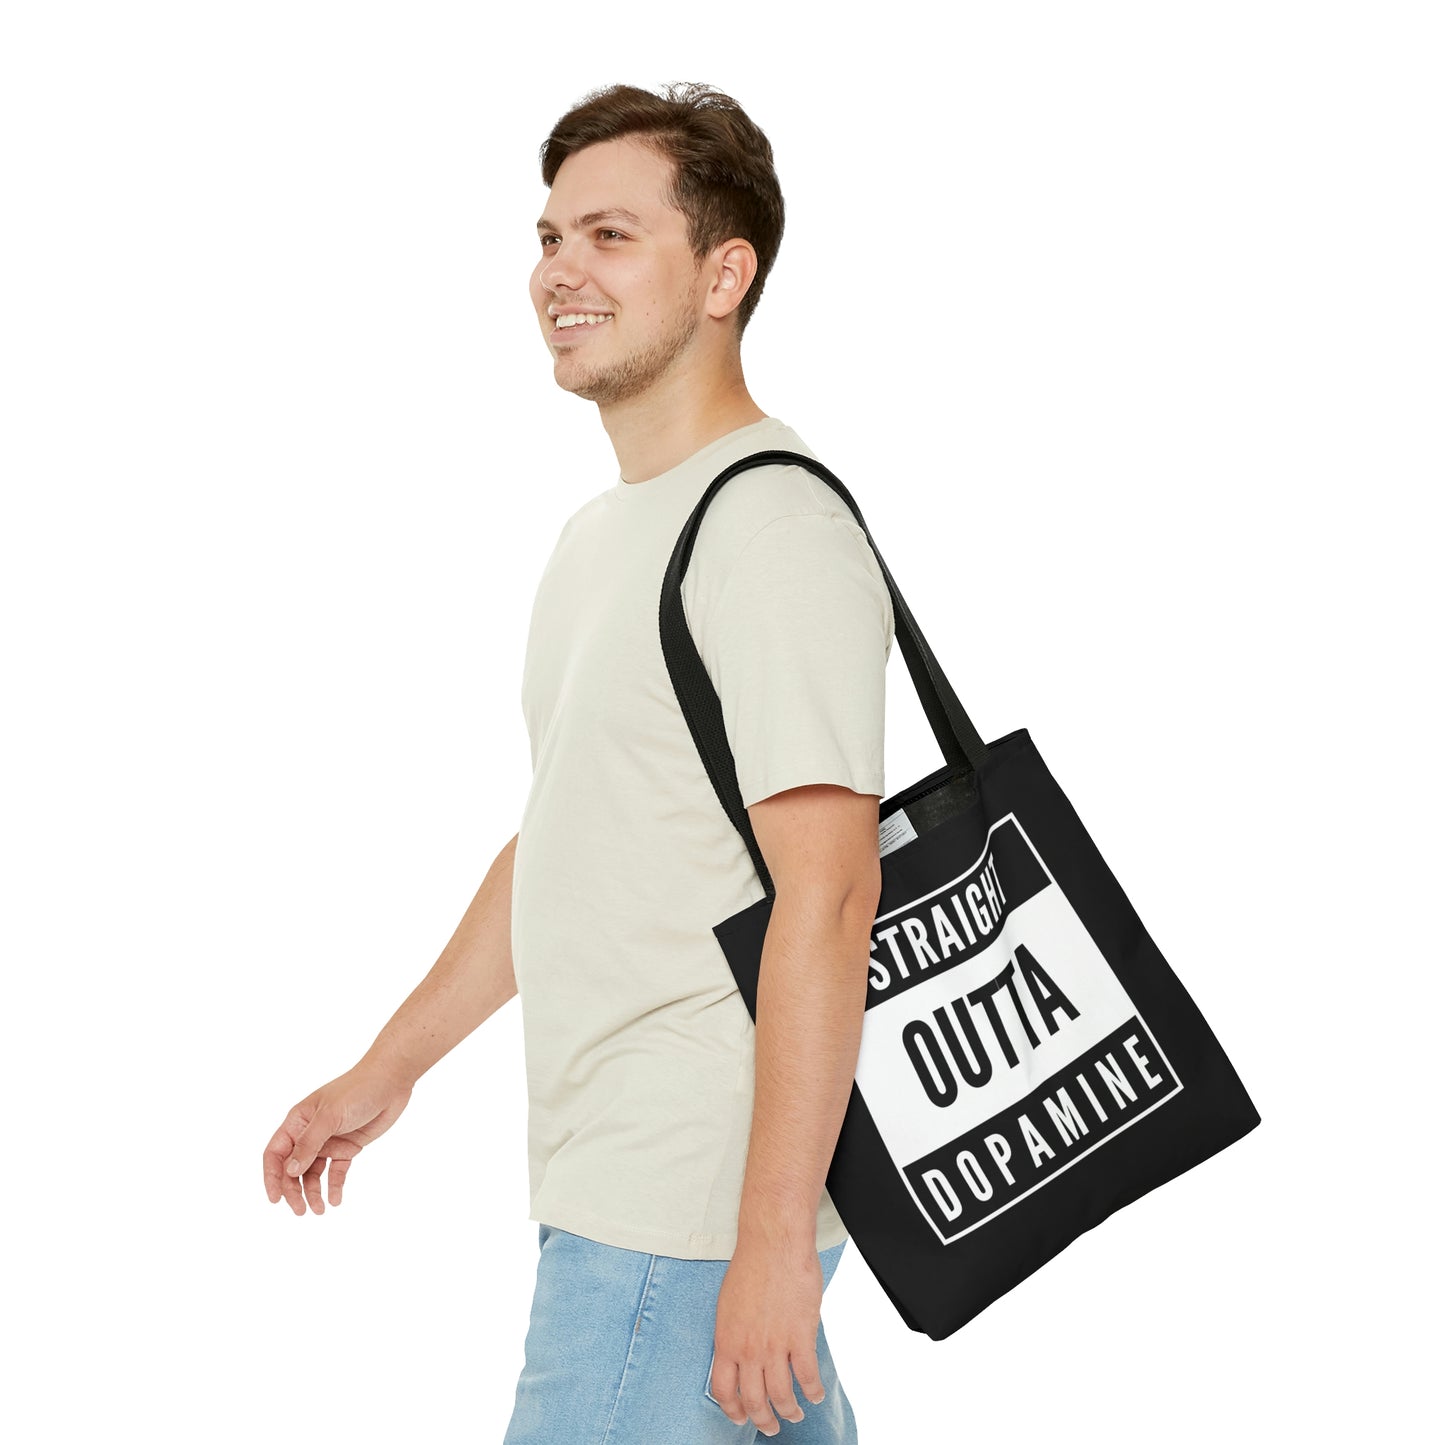 "Straight Outta Dopamine" Tote Bag in 3 sizes